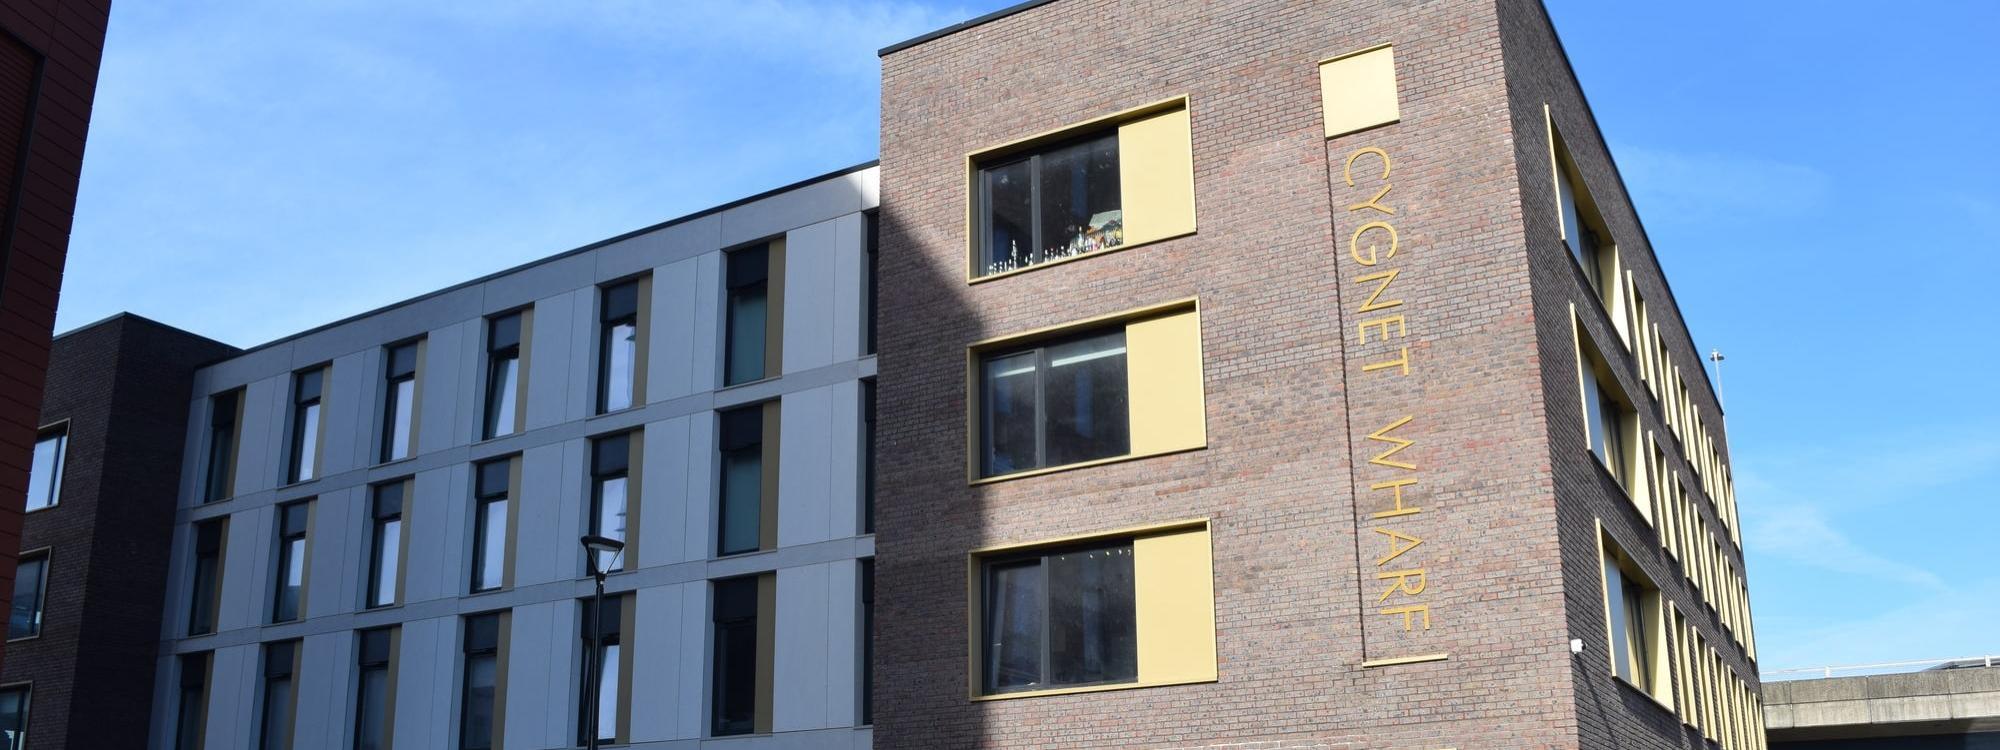 Cygnet Wharf accommodation at the University of Lincoln